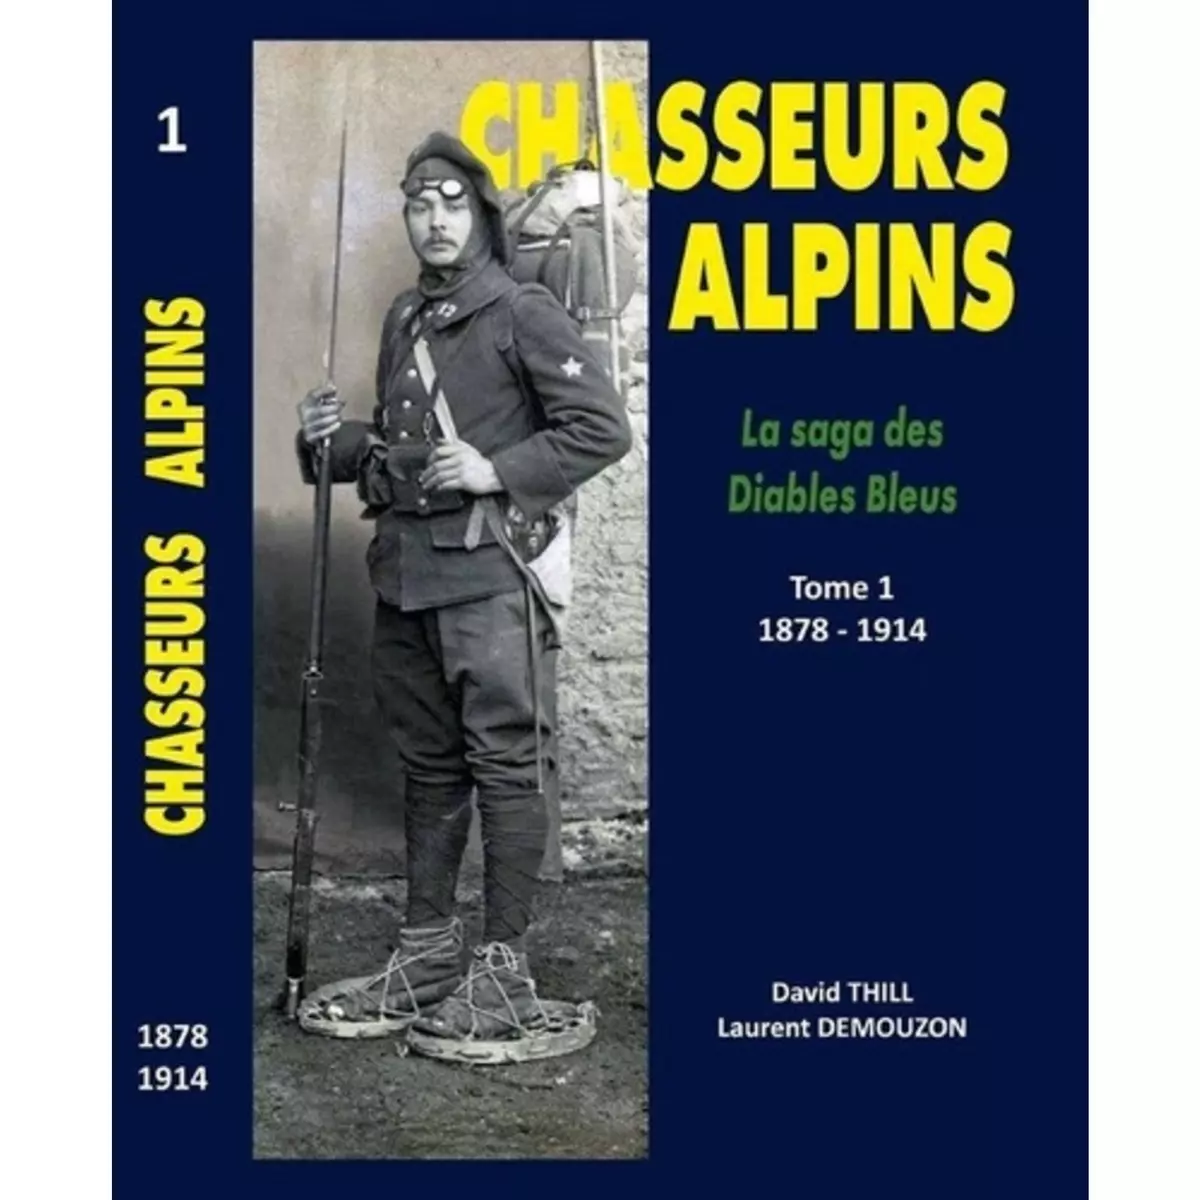  CHASSEURS ALPINS. TOME 1, 1878-1914, Thill David